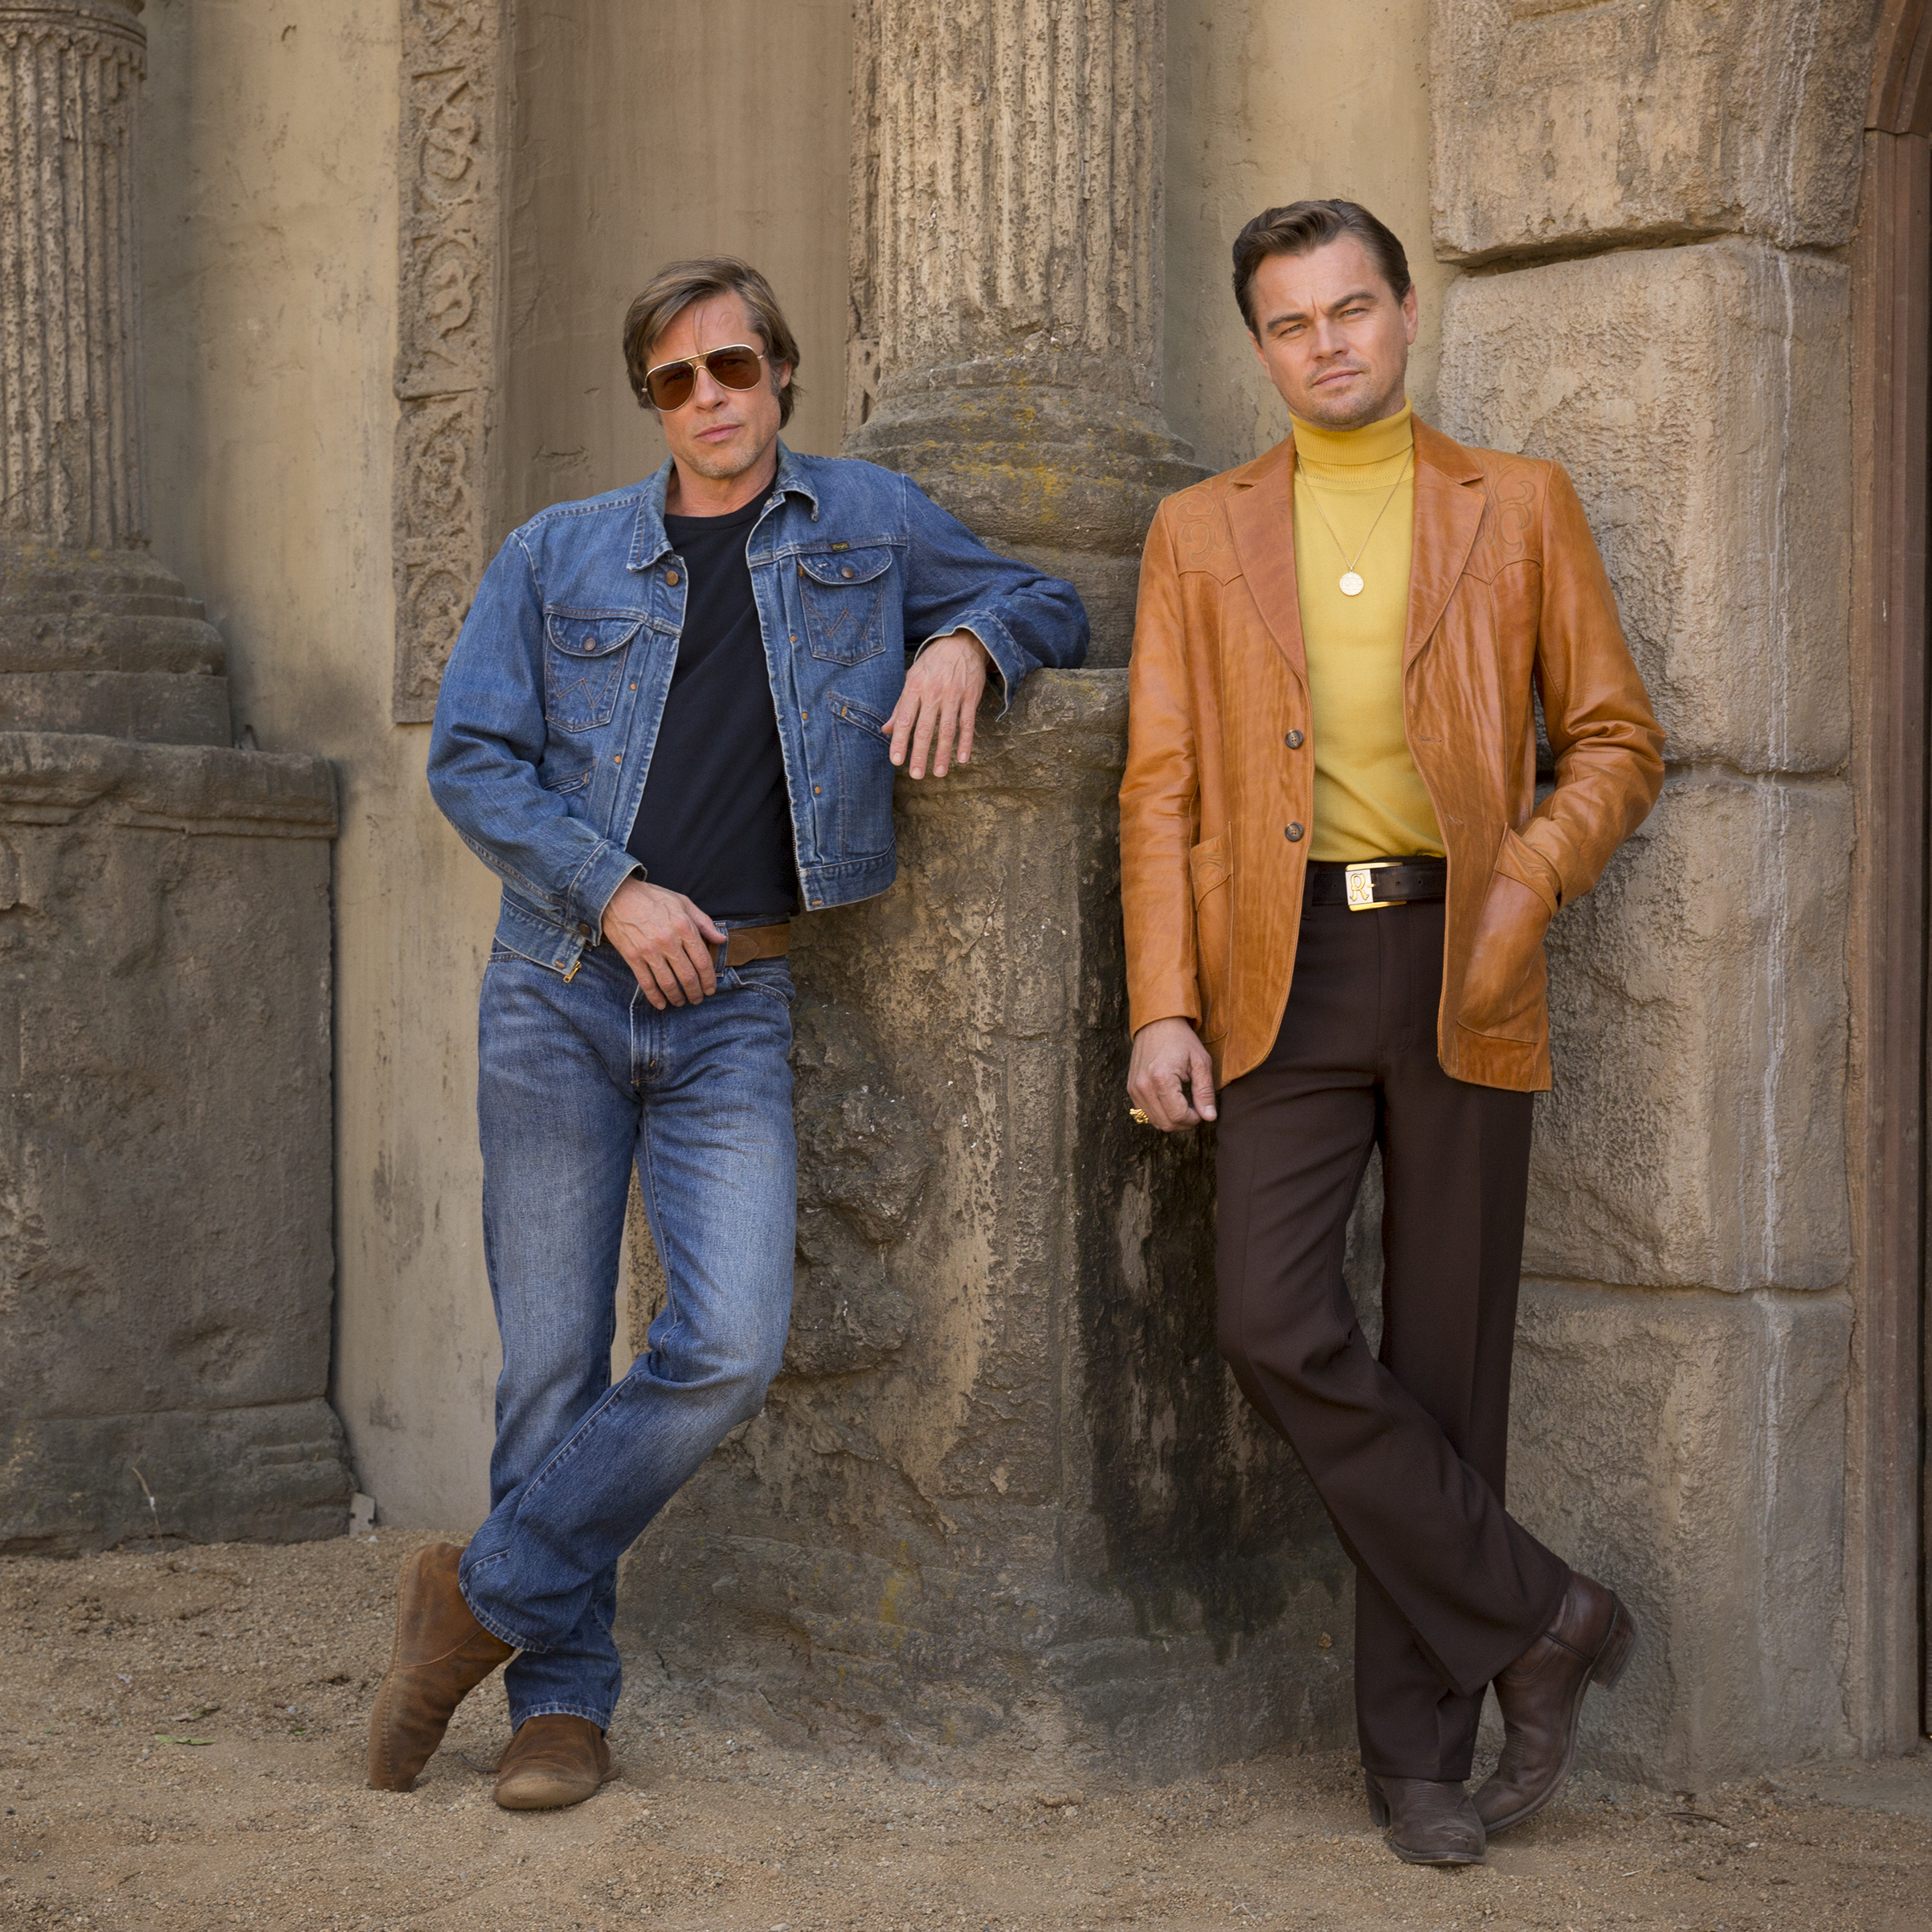 Brad Pitt and Leonardo DiCaprio in 'Once Upon a Time in Hollywood' (Sony Pictures)